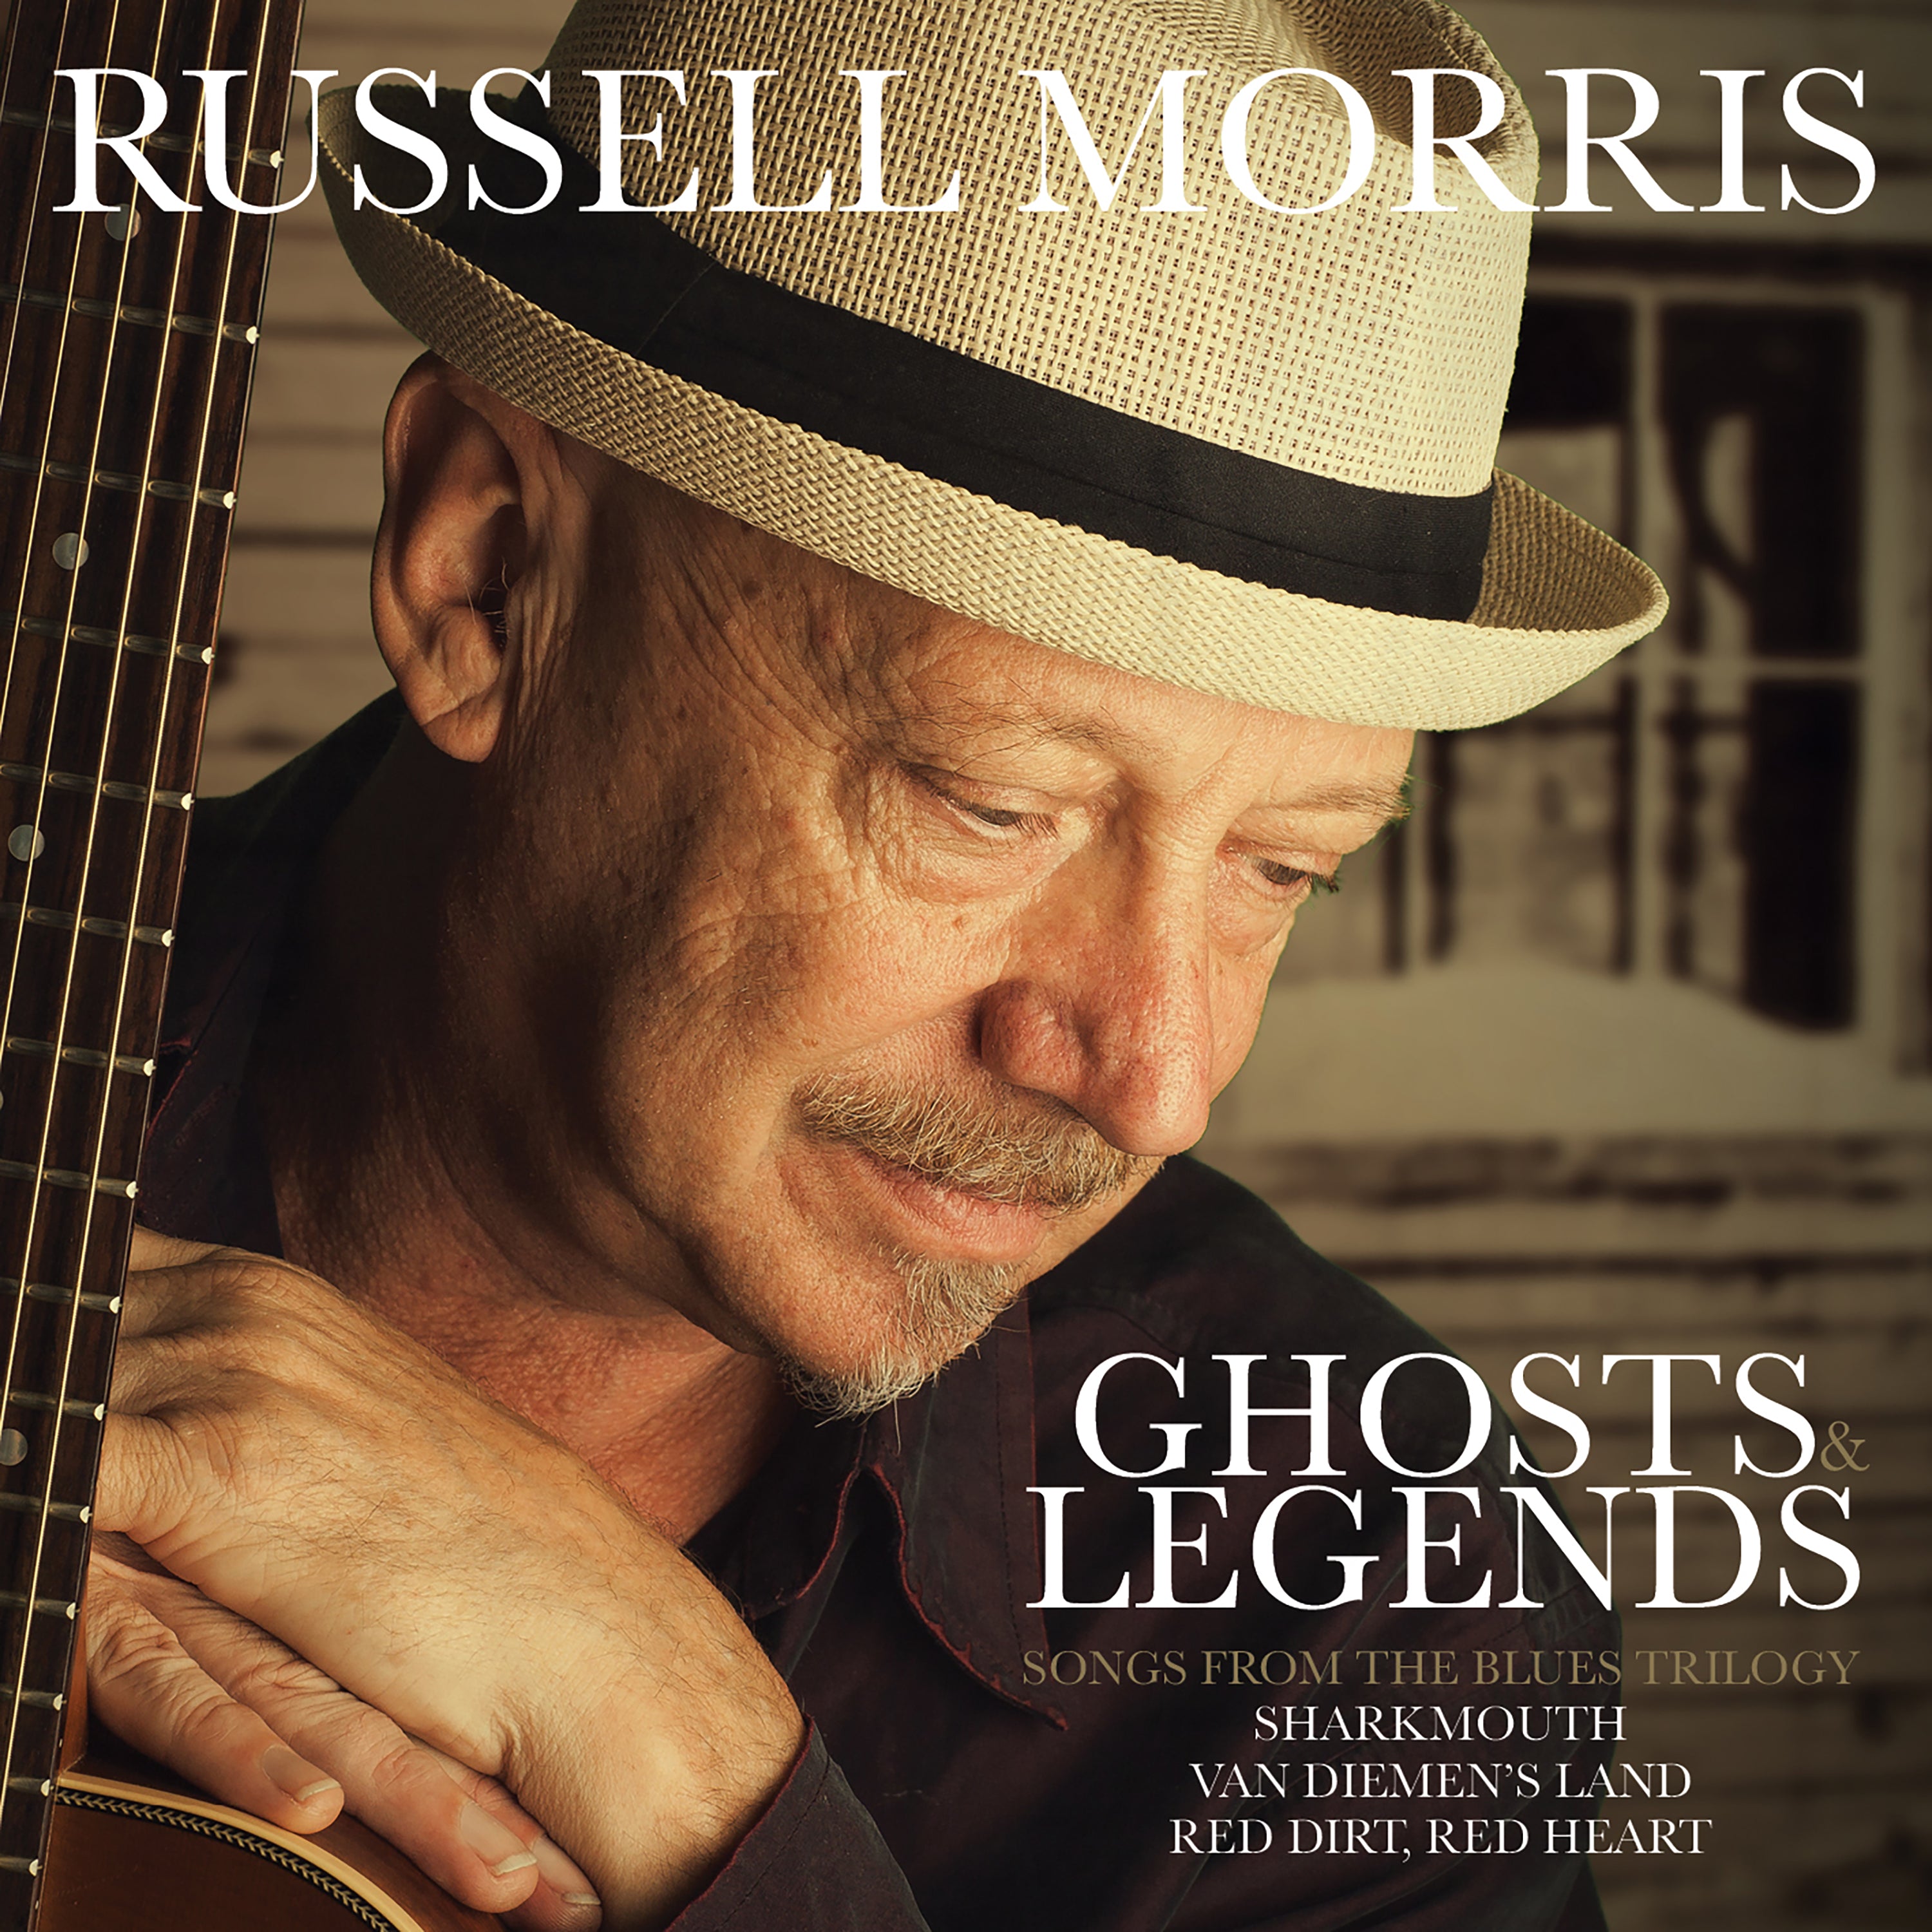 RUSSELL MORRIS - GHOSTS & LEGENDS (SIGNED CD)